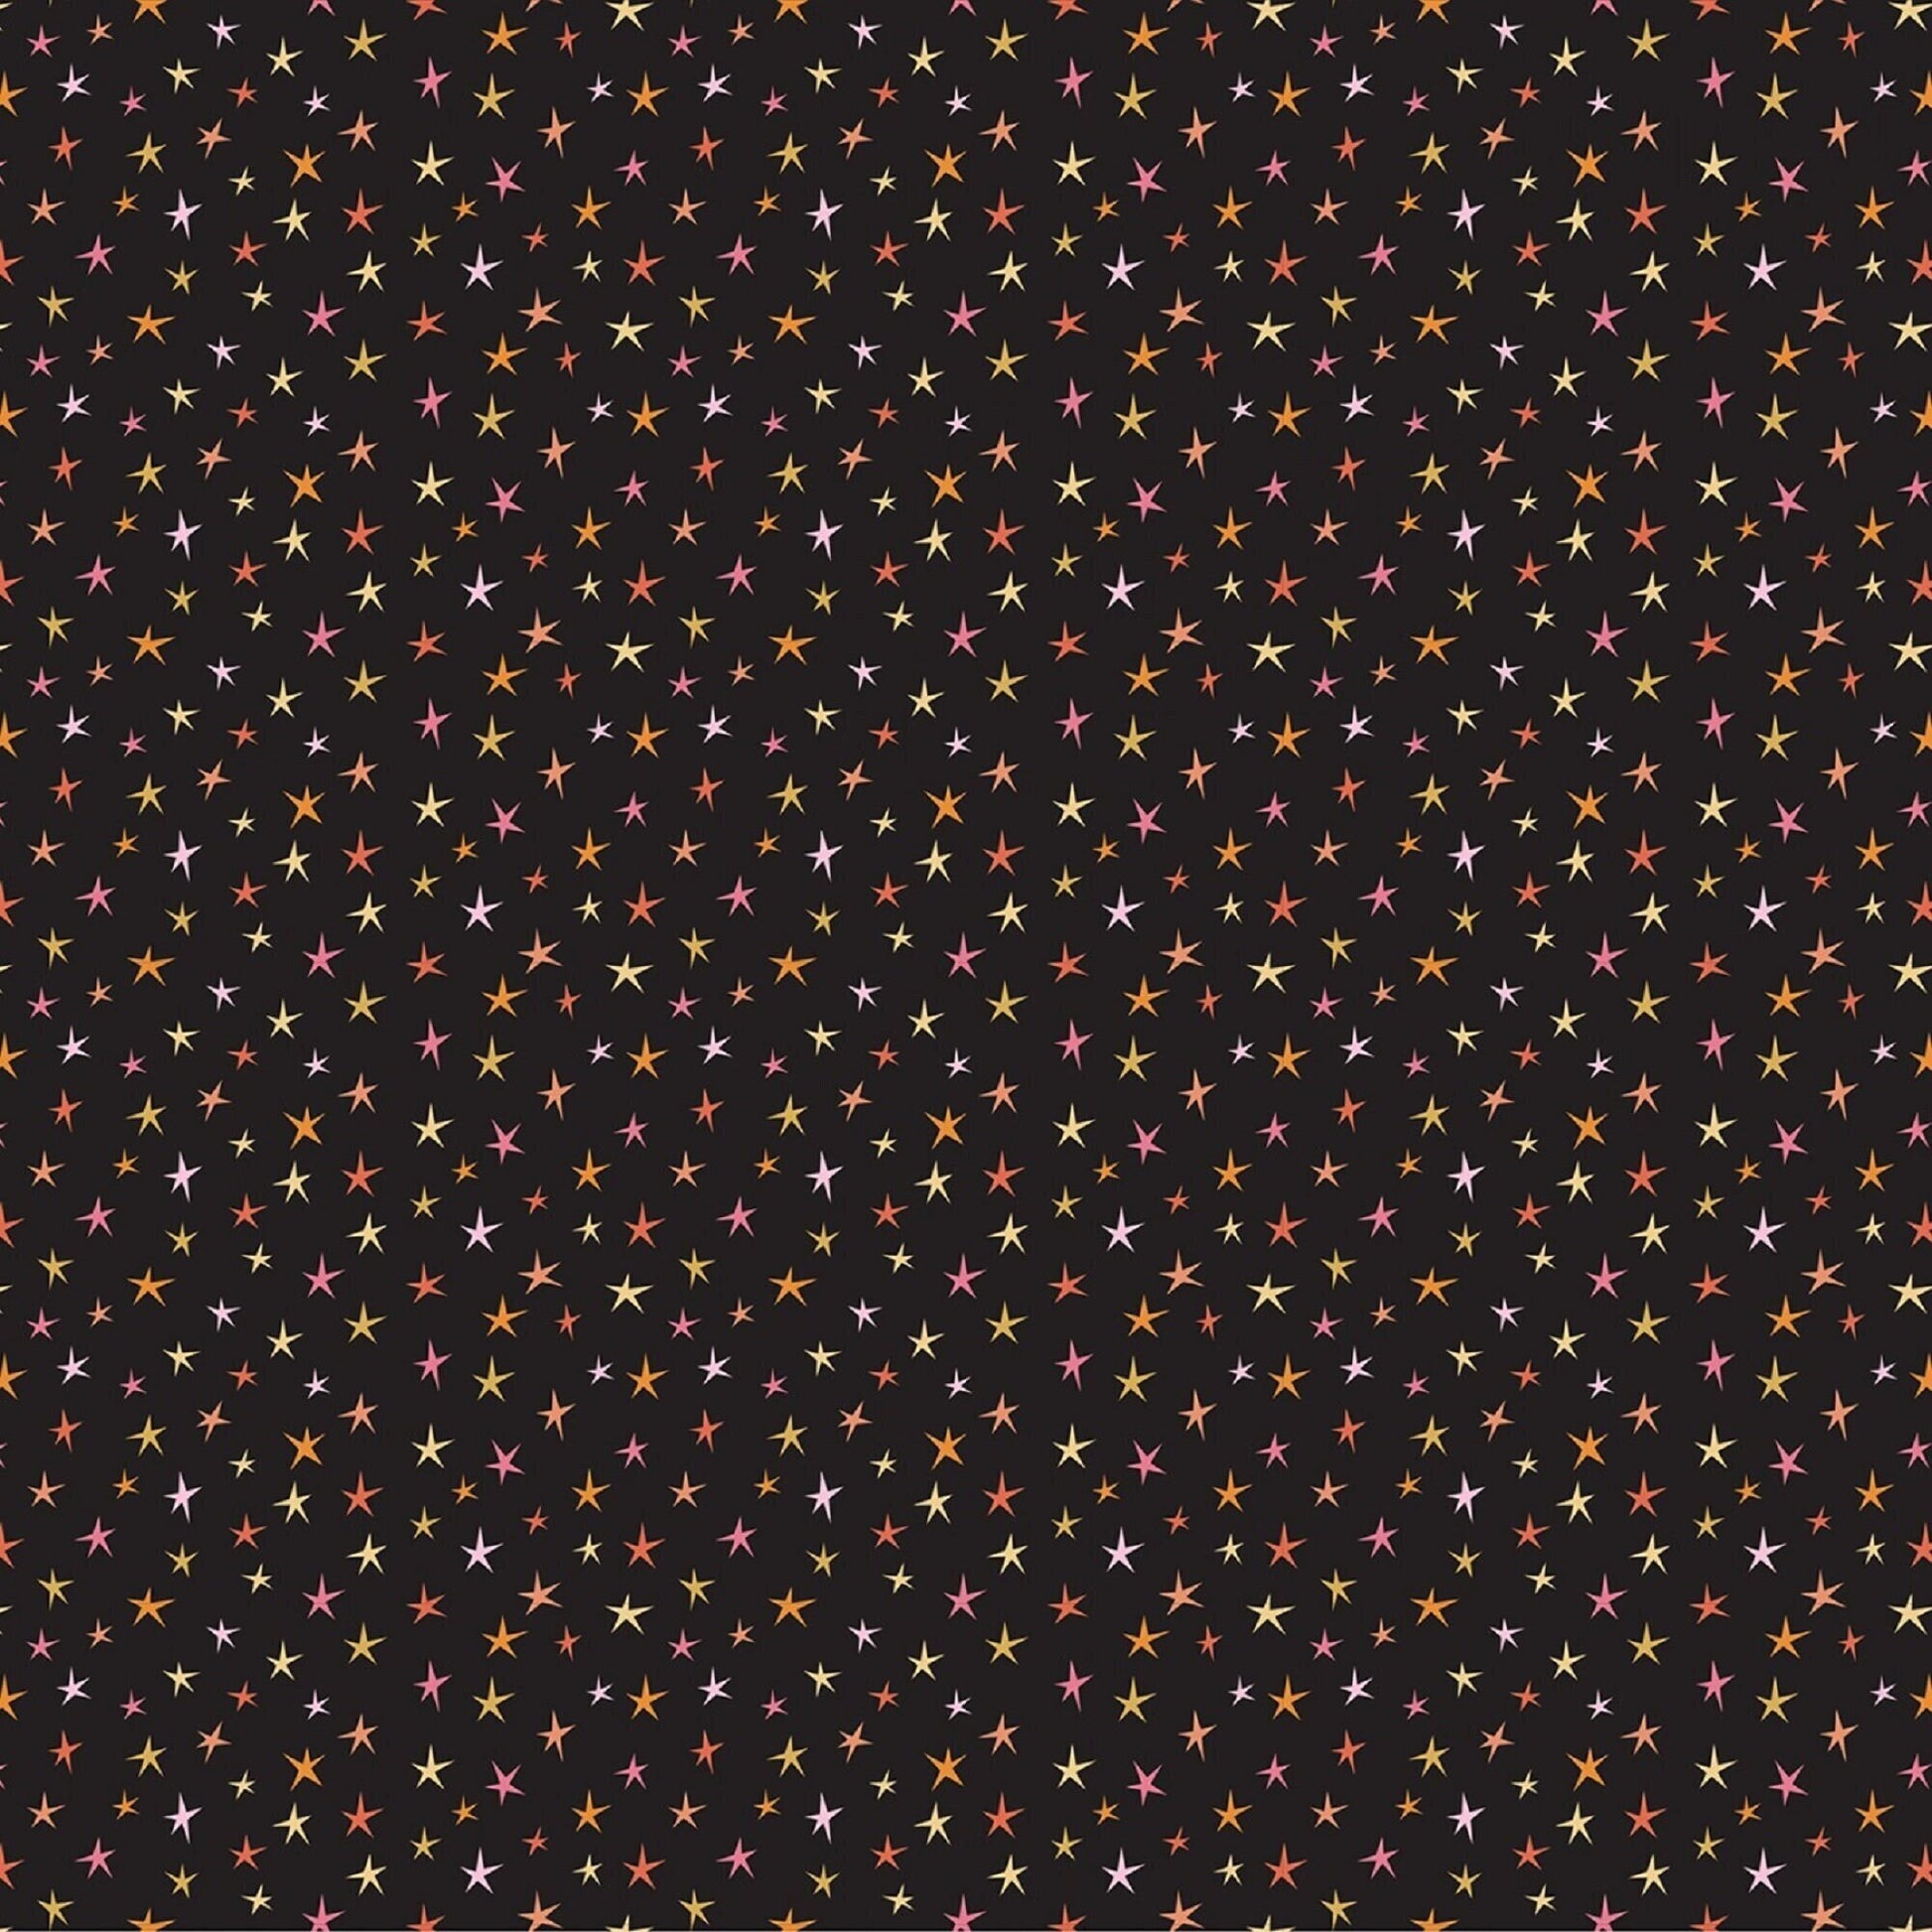 Sparkly Stars Black Kitty Loves Candy Lori Woods Poppie Cotton Fabric 100% Quilters Cotton Fabric Fetish